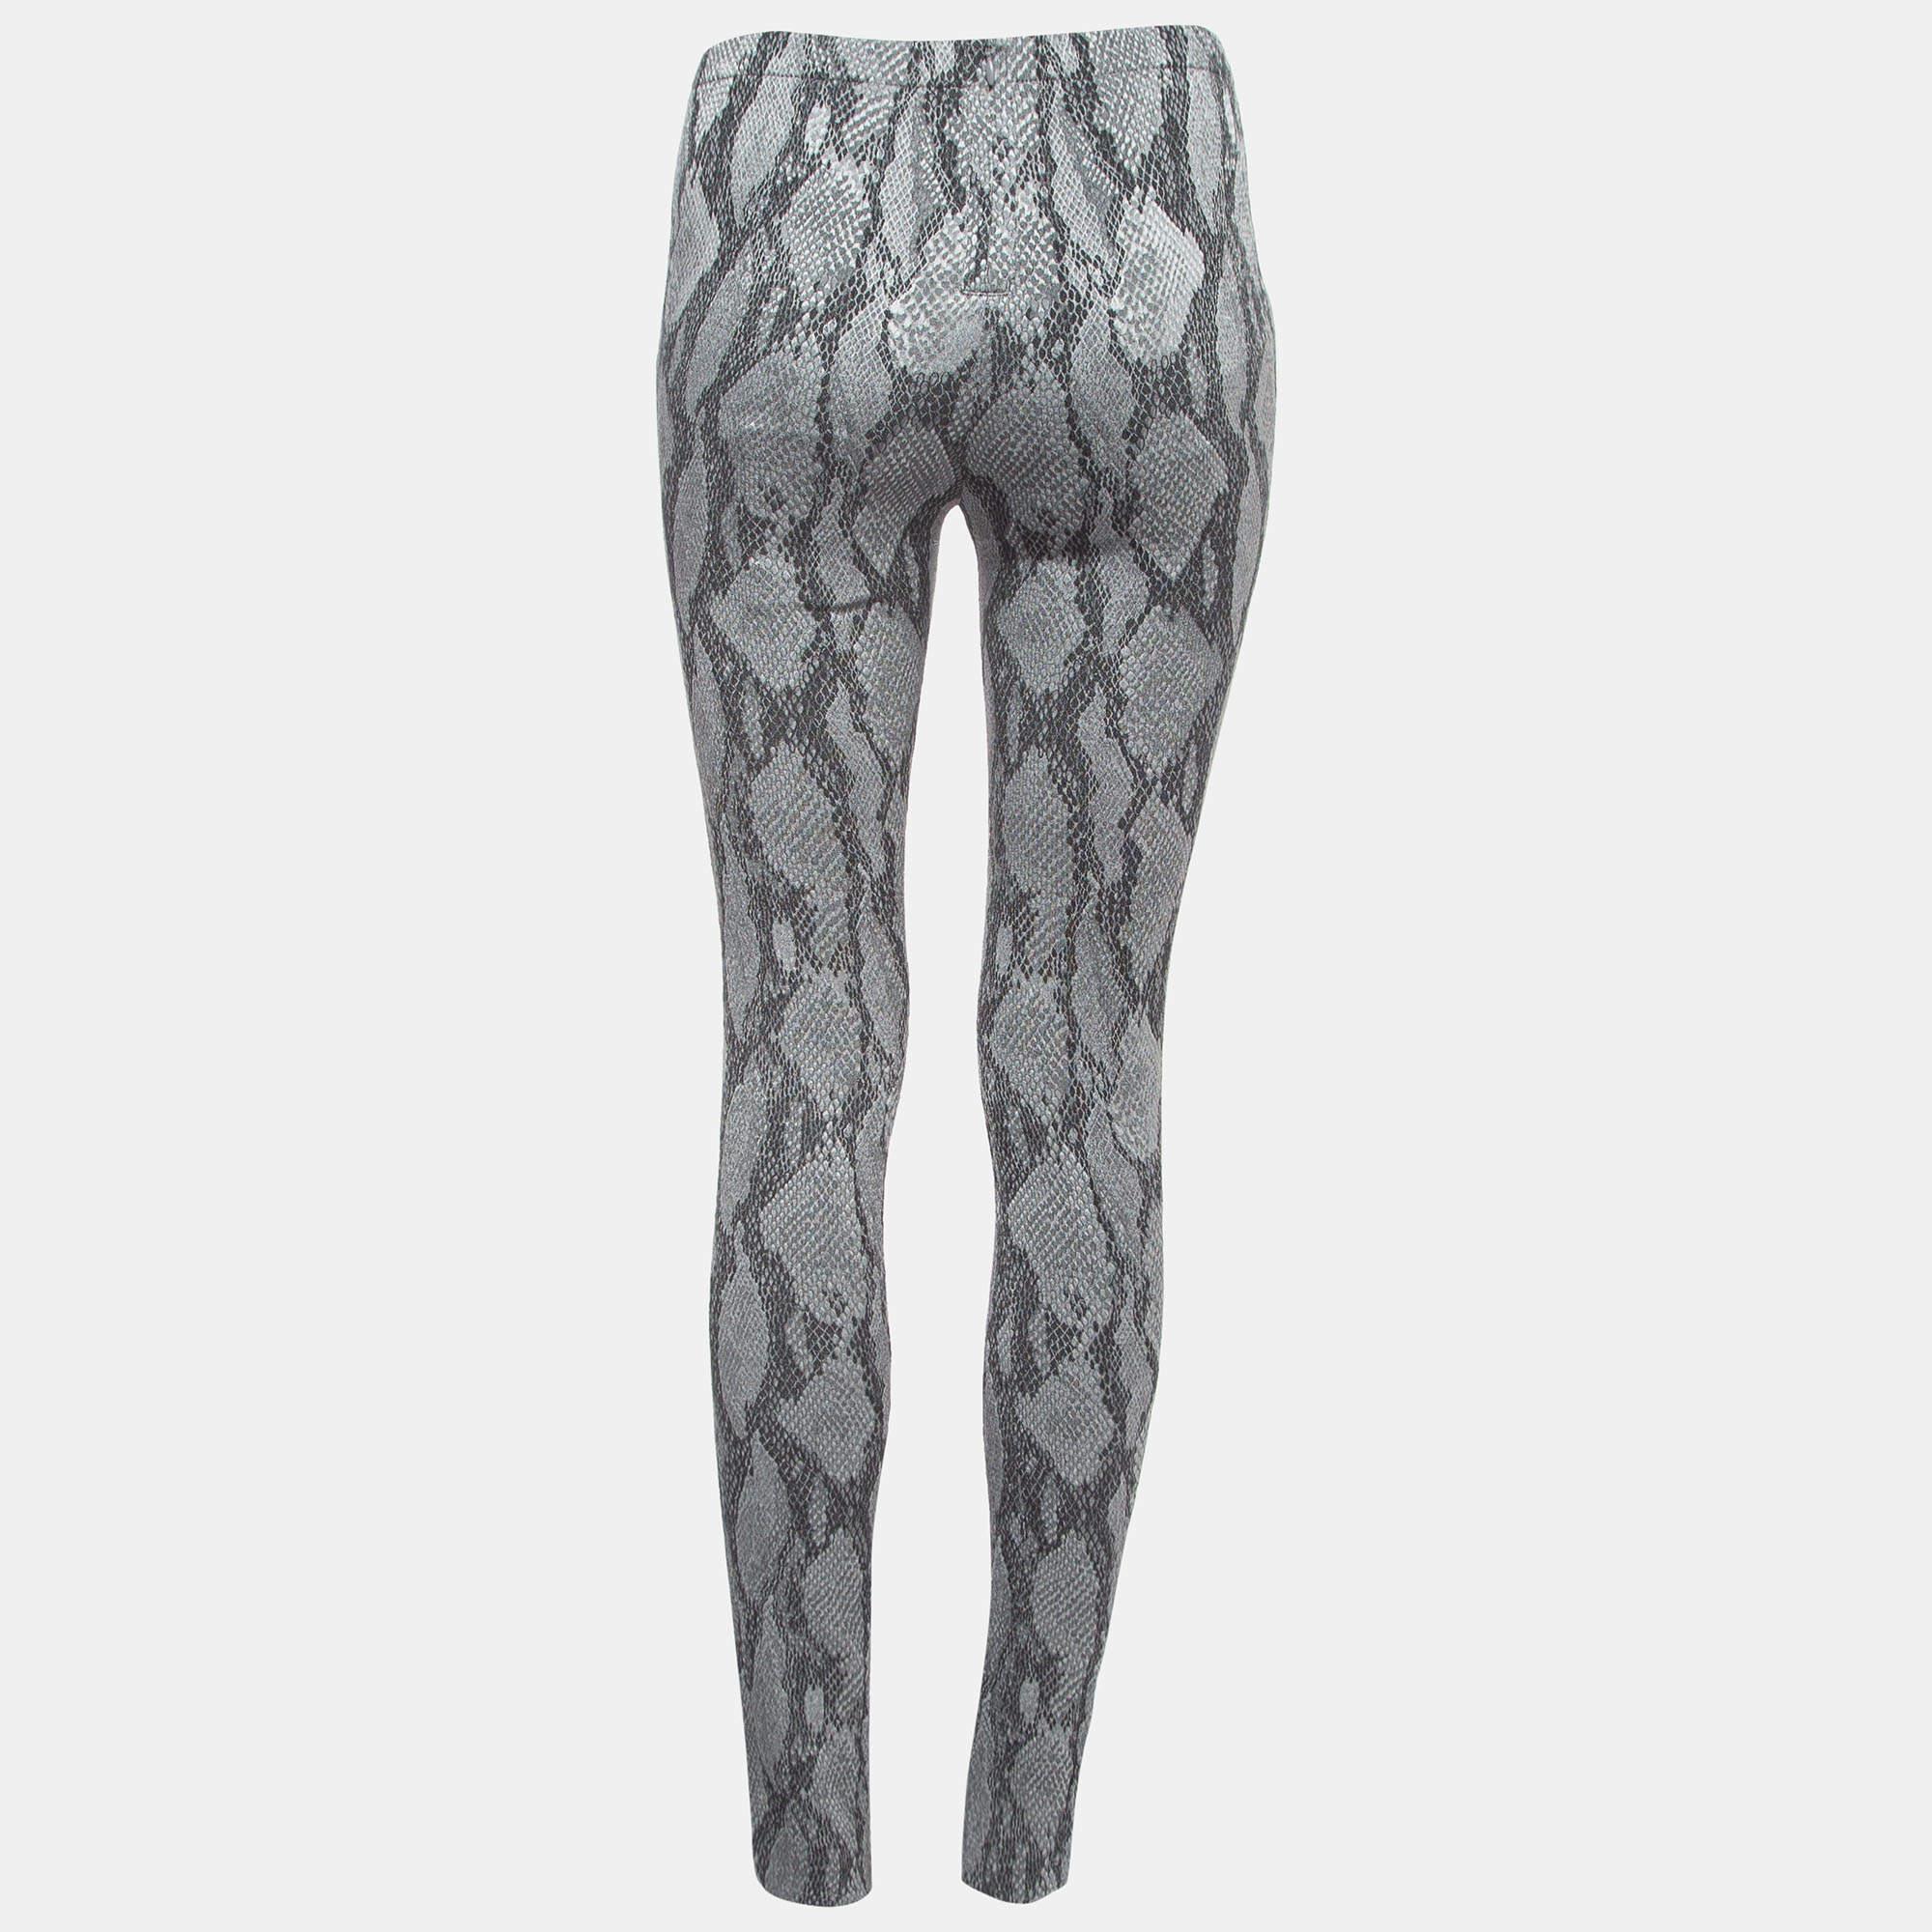 Enhance your casual attire with this pair of leggings. Designed into a superb silhouette and fit, this pair will definitely make you look chic.

